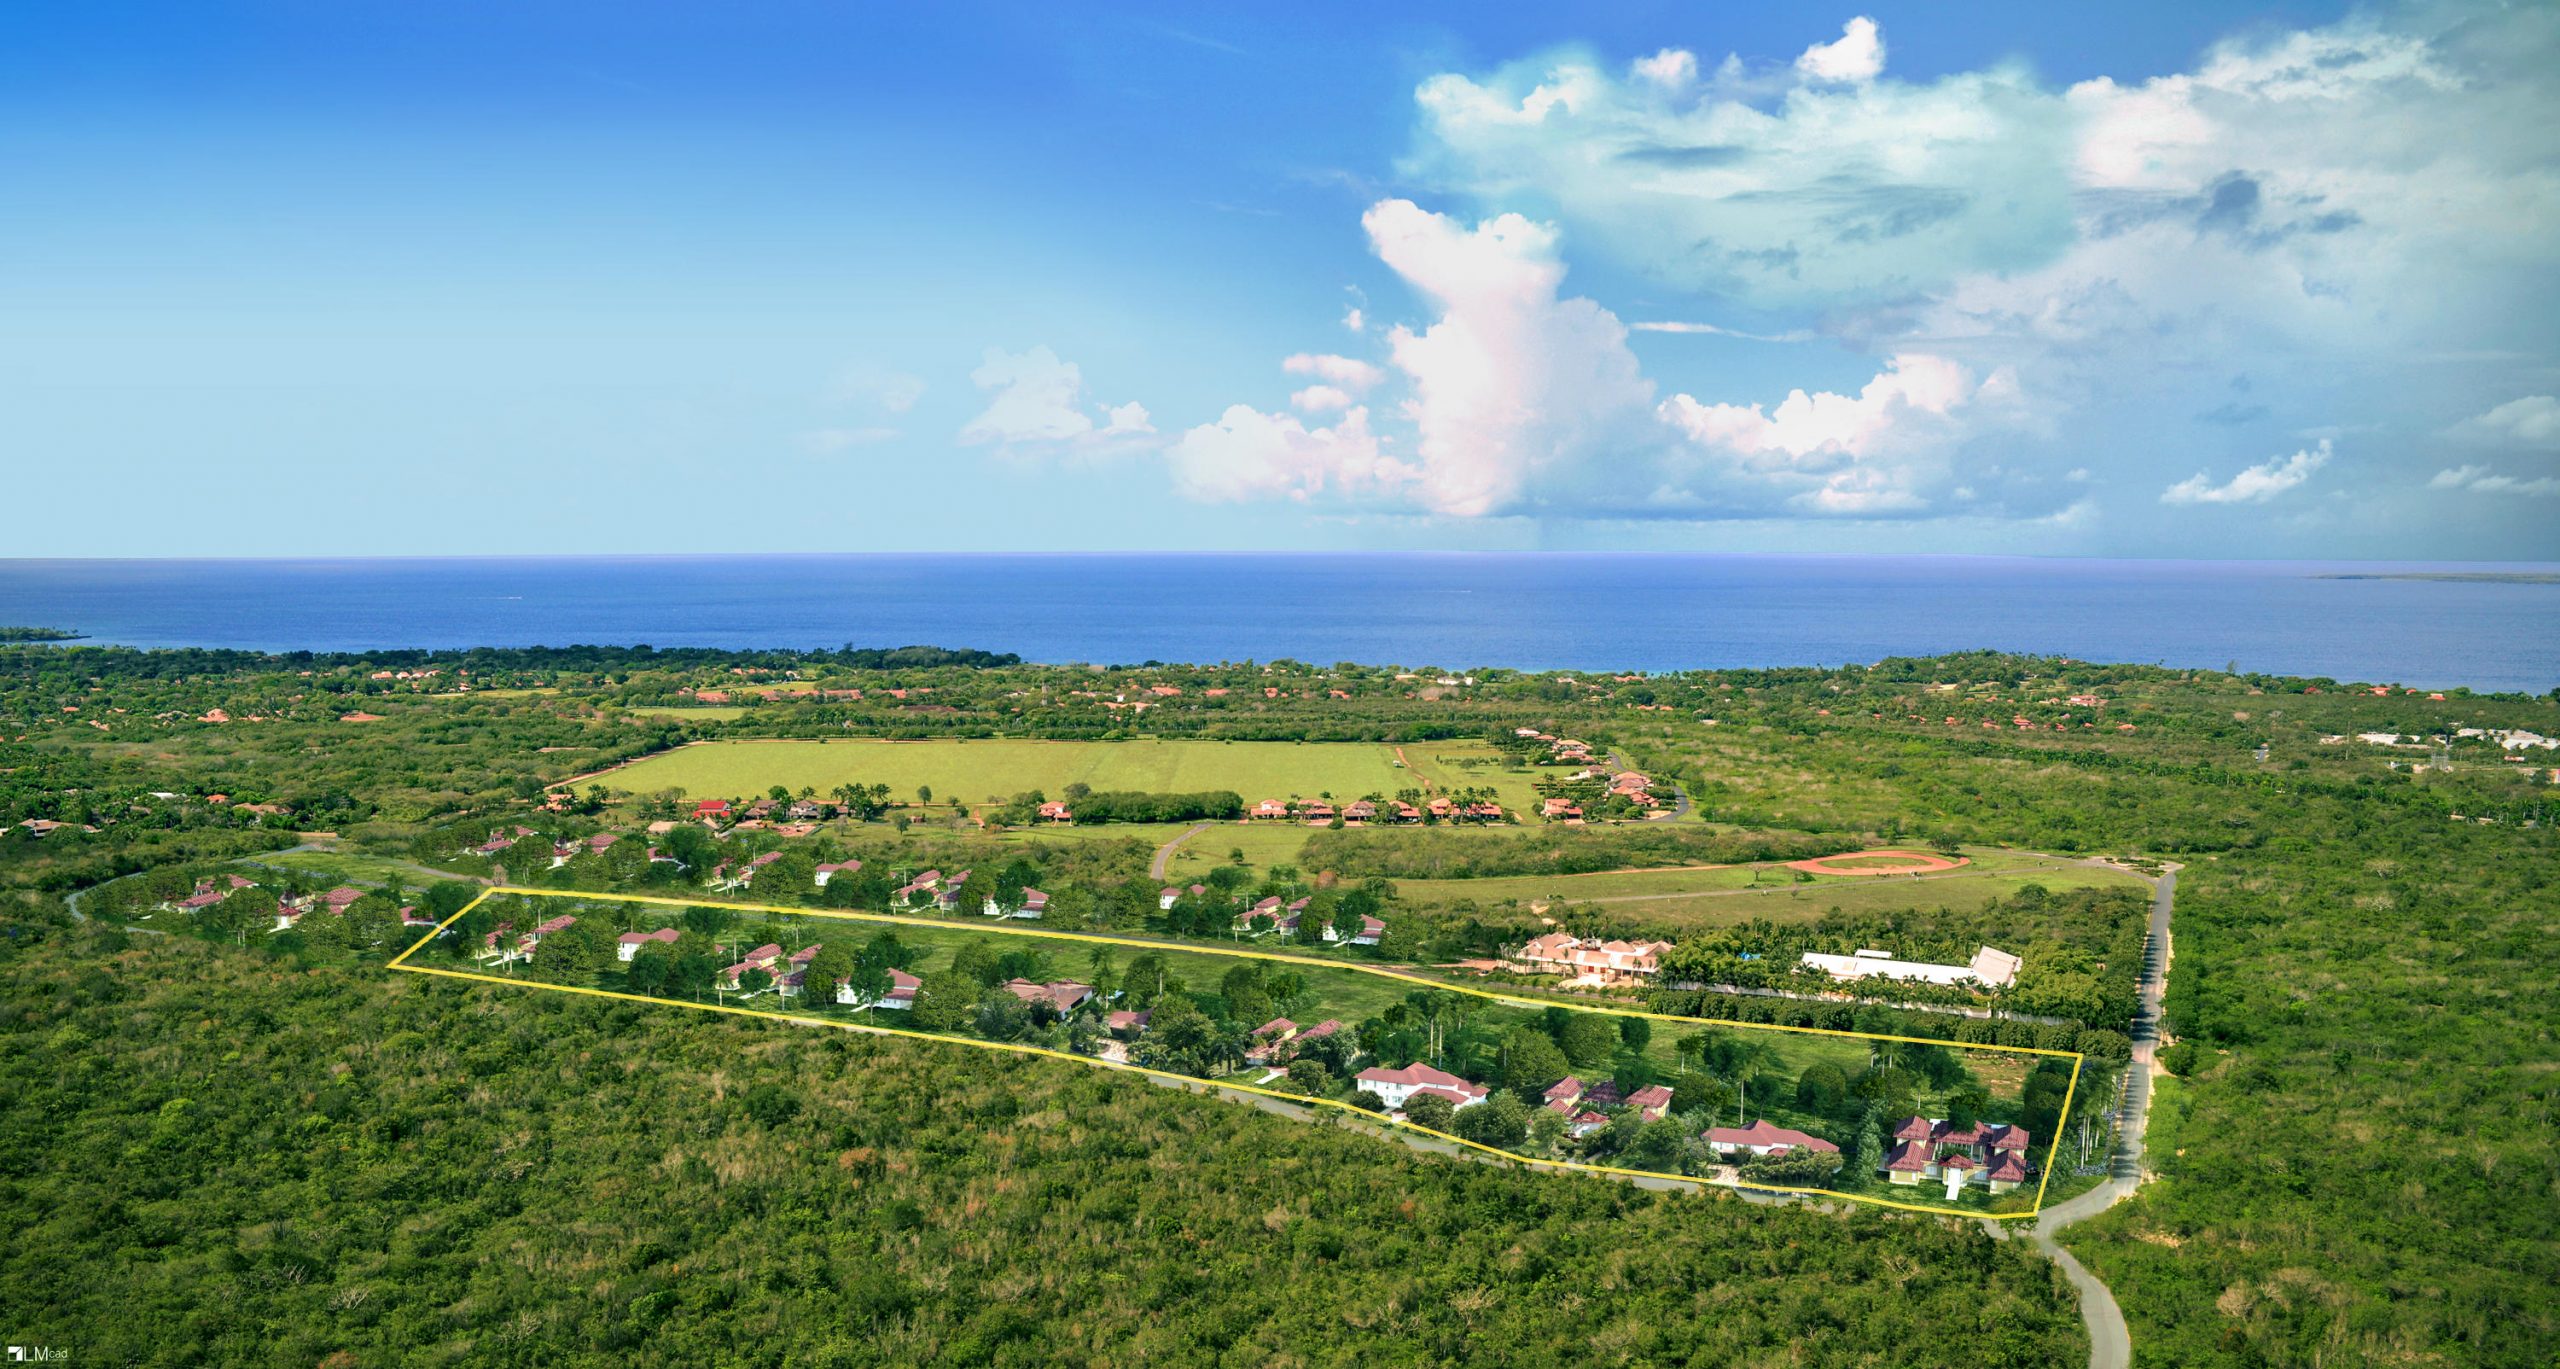 14 lots of 2500m2 at only 250.00/m2 with Ocean-views at Casa de Campo Resort